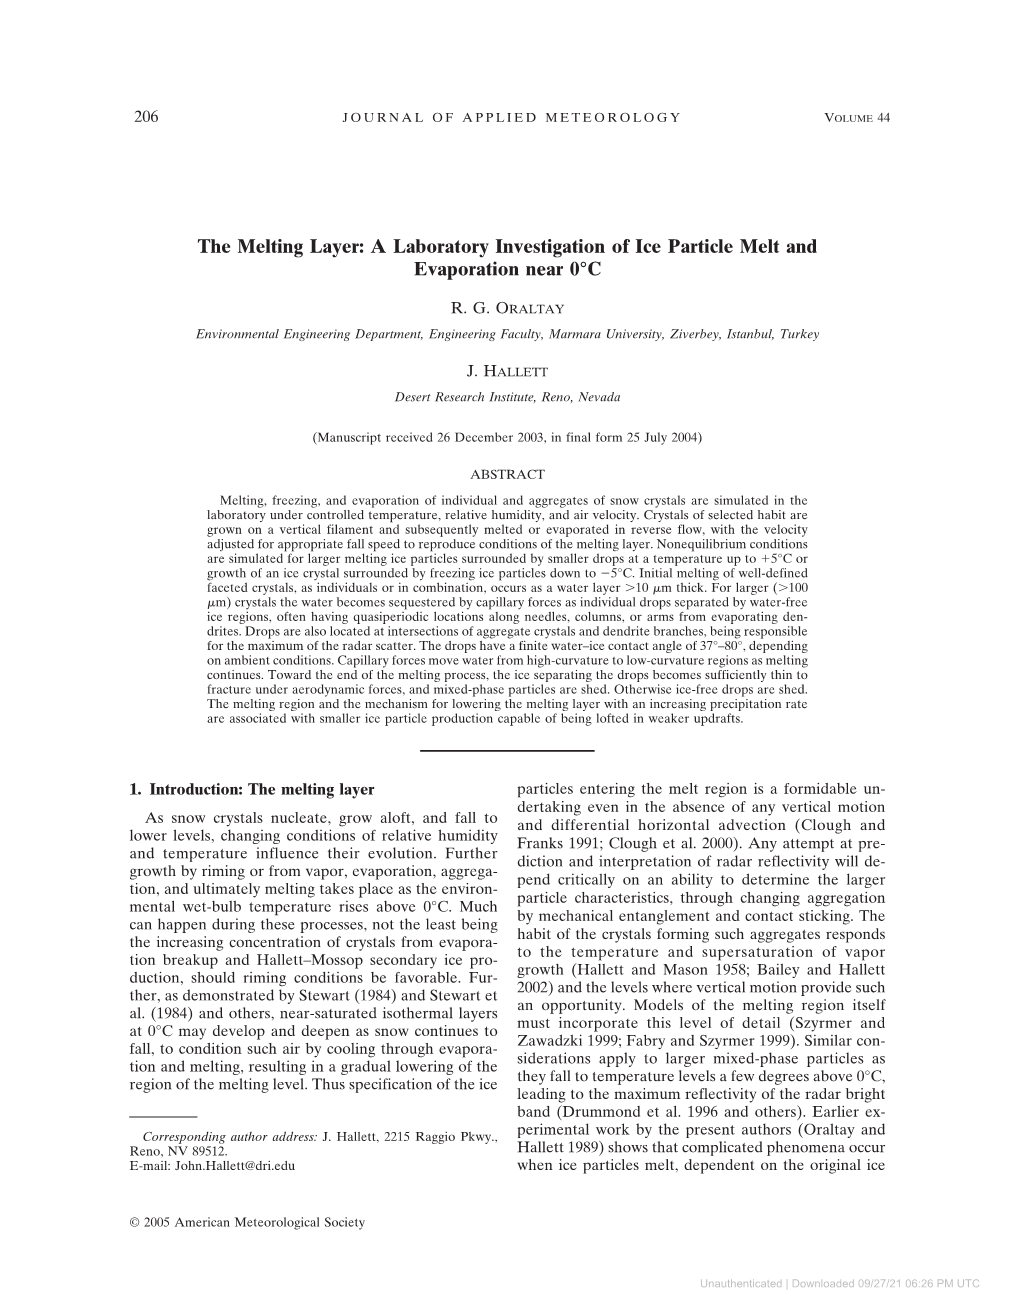 The Melting Layer: a Laboratory Investigation of Ice Particle Melt and Evaporation Near 0°C